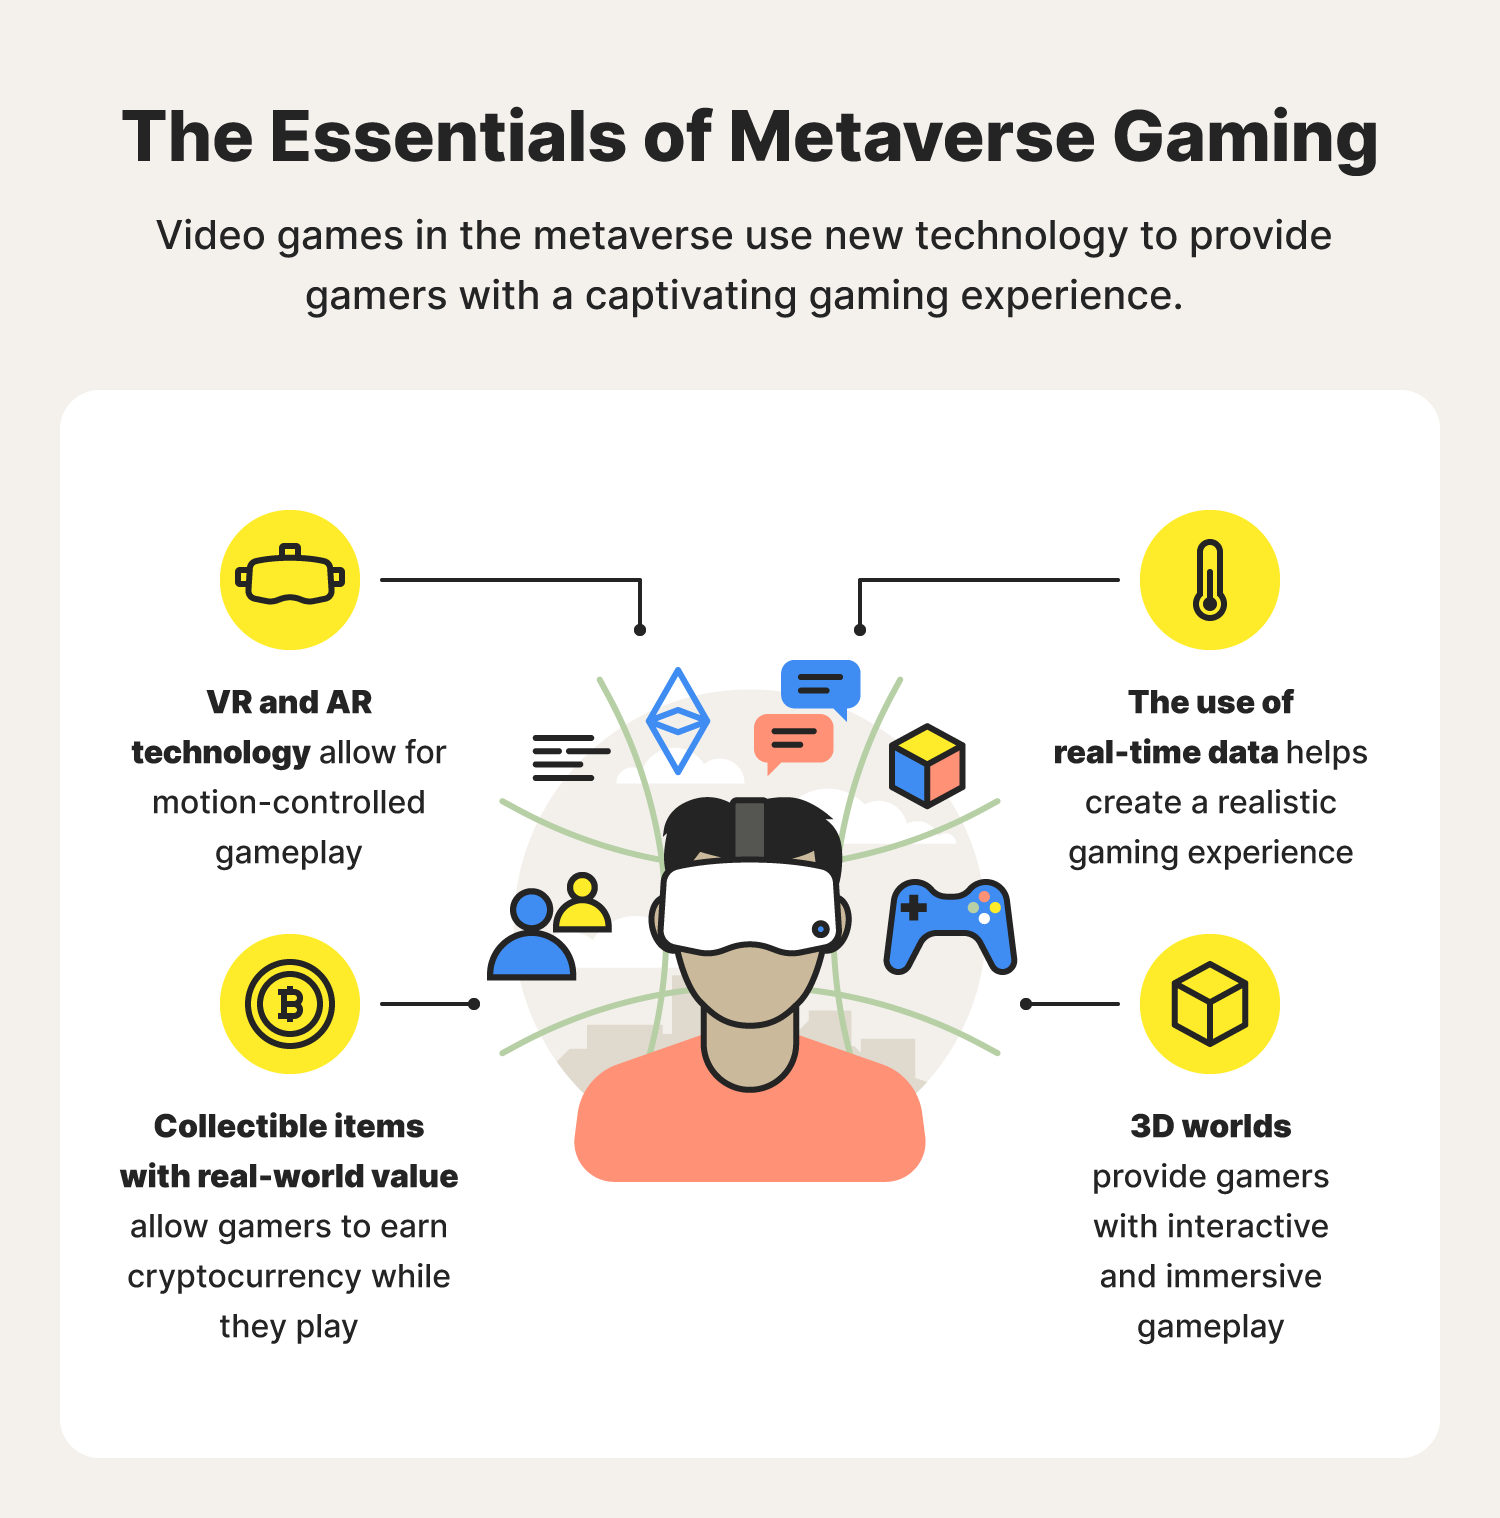 A graphic illustrates four different characteristics of metaverse gaming.